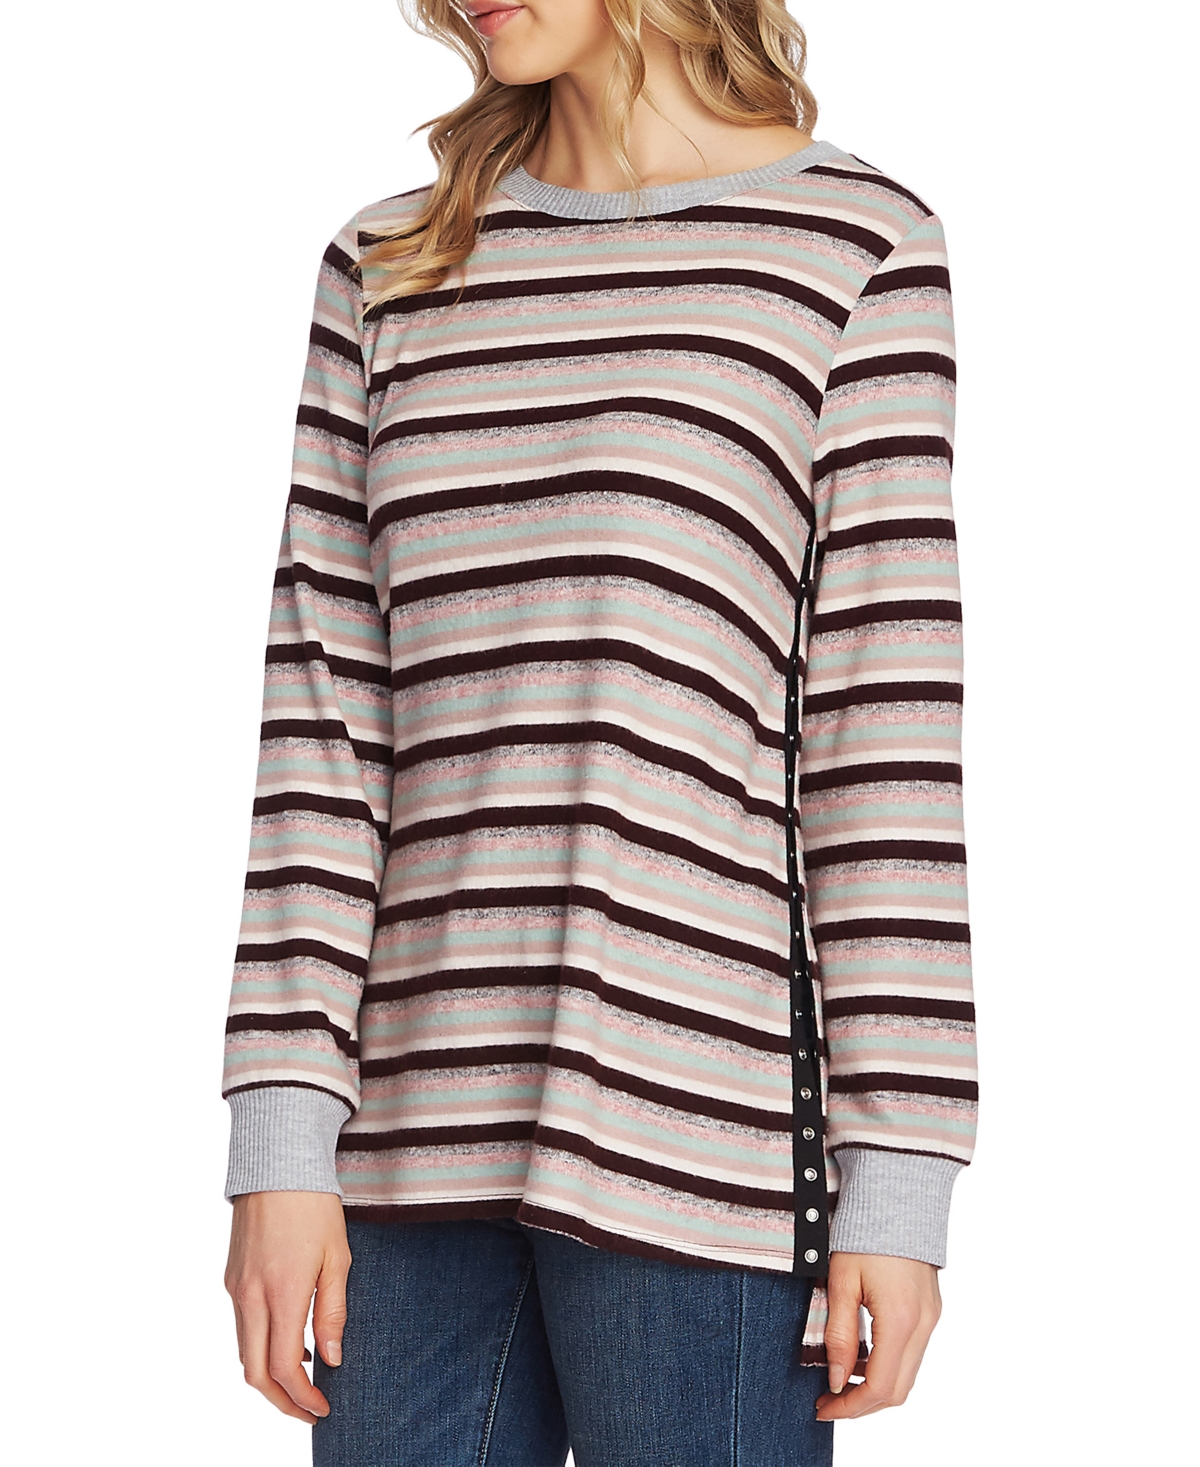 Vince Camuto Striped Crewneck Sweater In Port